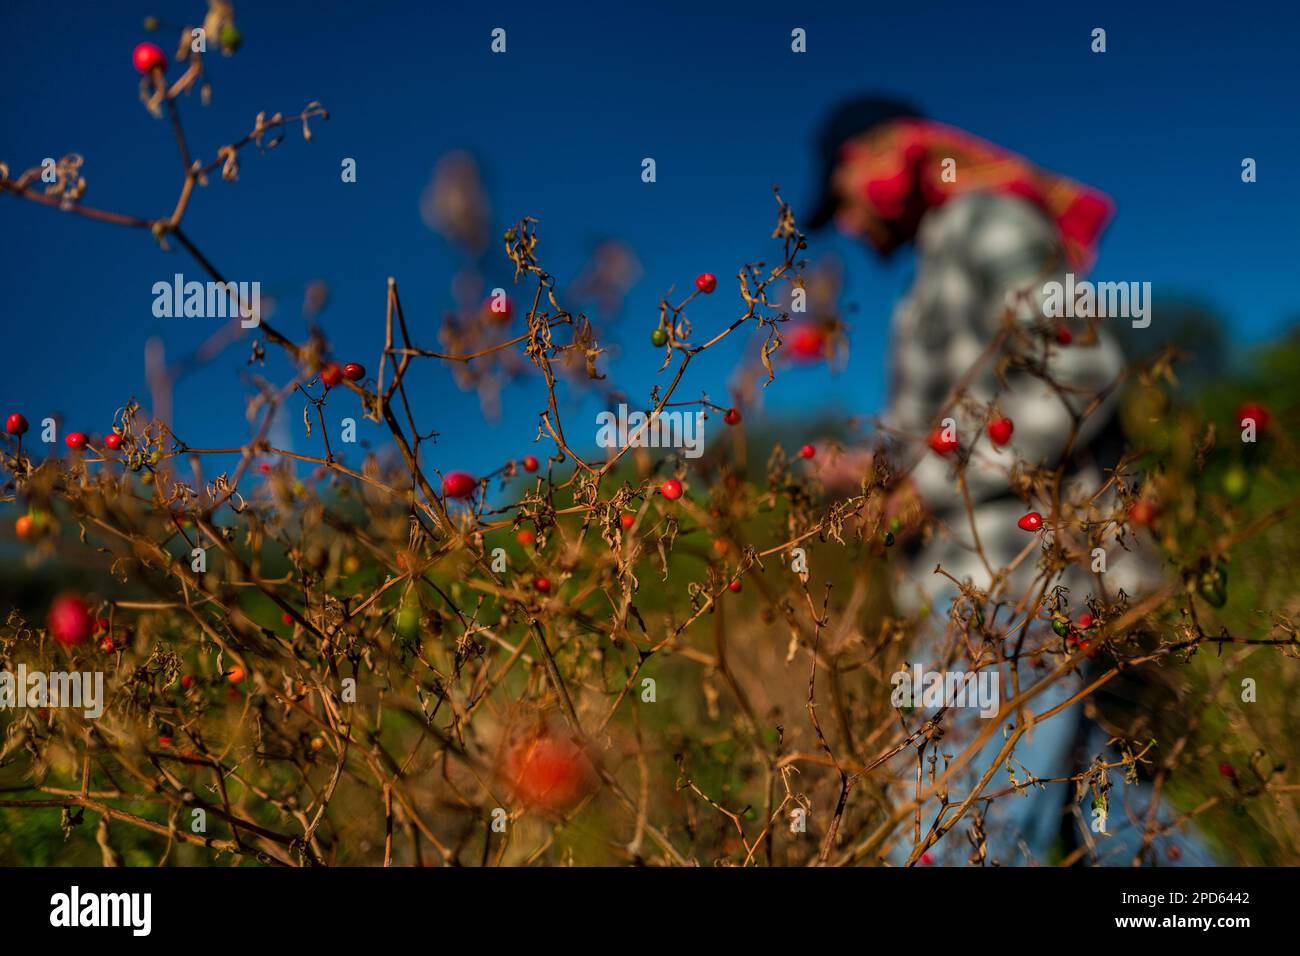 A Mexican peasant walks on a field of chiltepin peppers, a wild variety of chili pepper, on a farm near Baviácora, Sonora, Mexico. Stock Photo